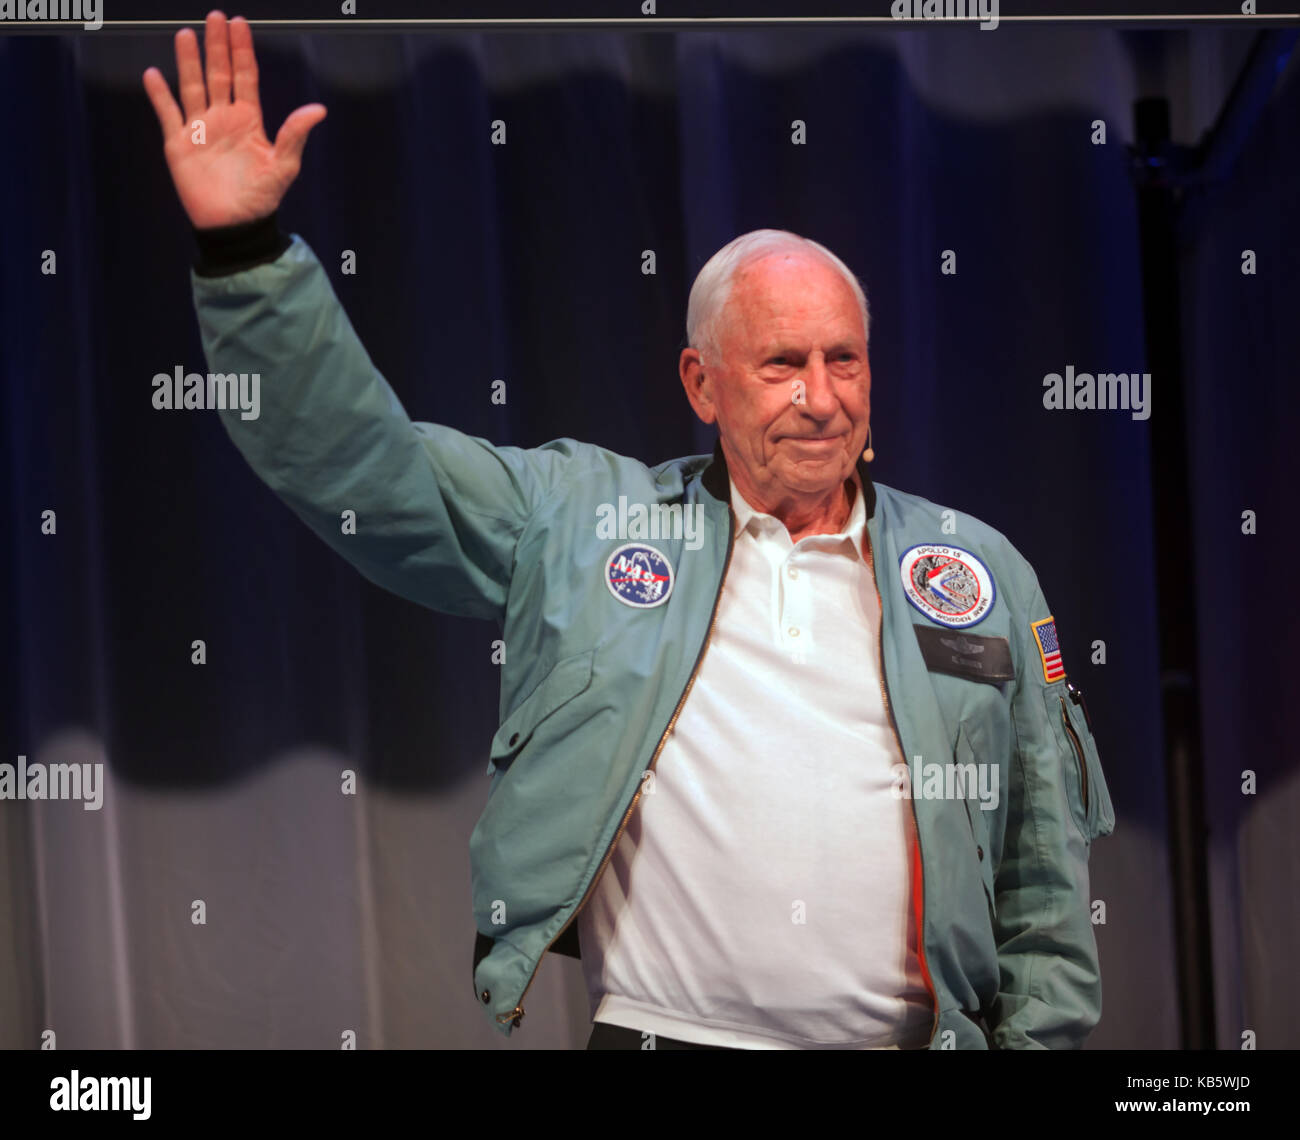 Al Worden,  American astronaut and engineer,  who was the Command Module Pilot for the Apollo 15 lunar mission in 1971.  arriving on the main stage at New Scientist Live 2017 Stock Photo